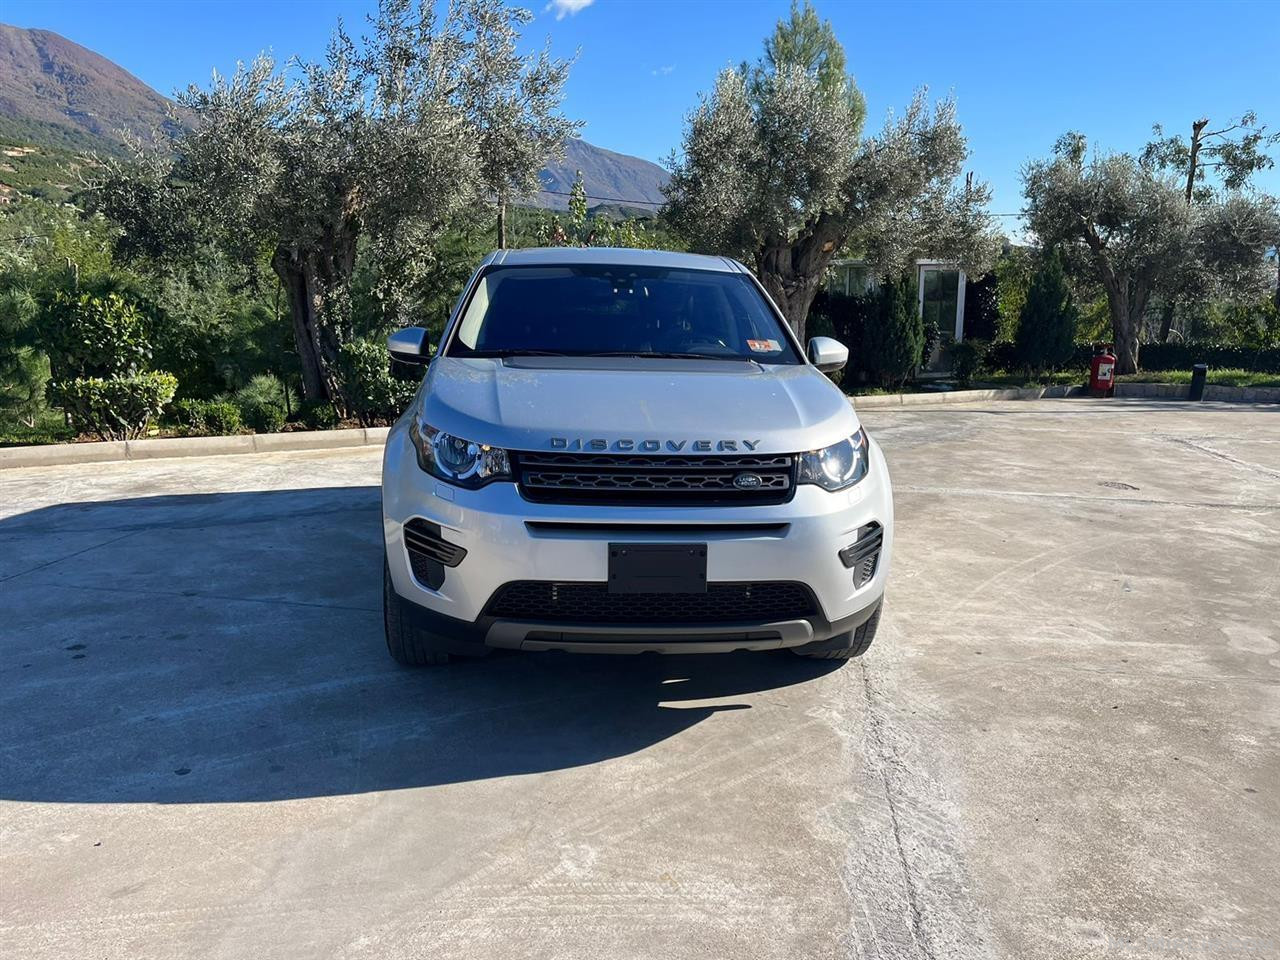 RANGE ROVER DISCOVERY SPORT 140 KM. FULL OPSION/CLEAR CARFAX